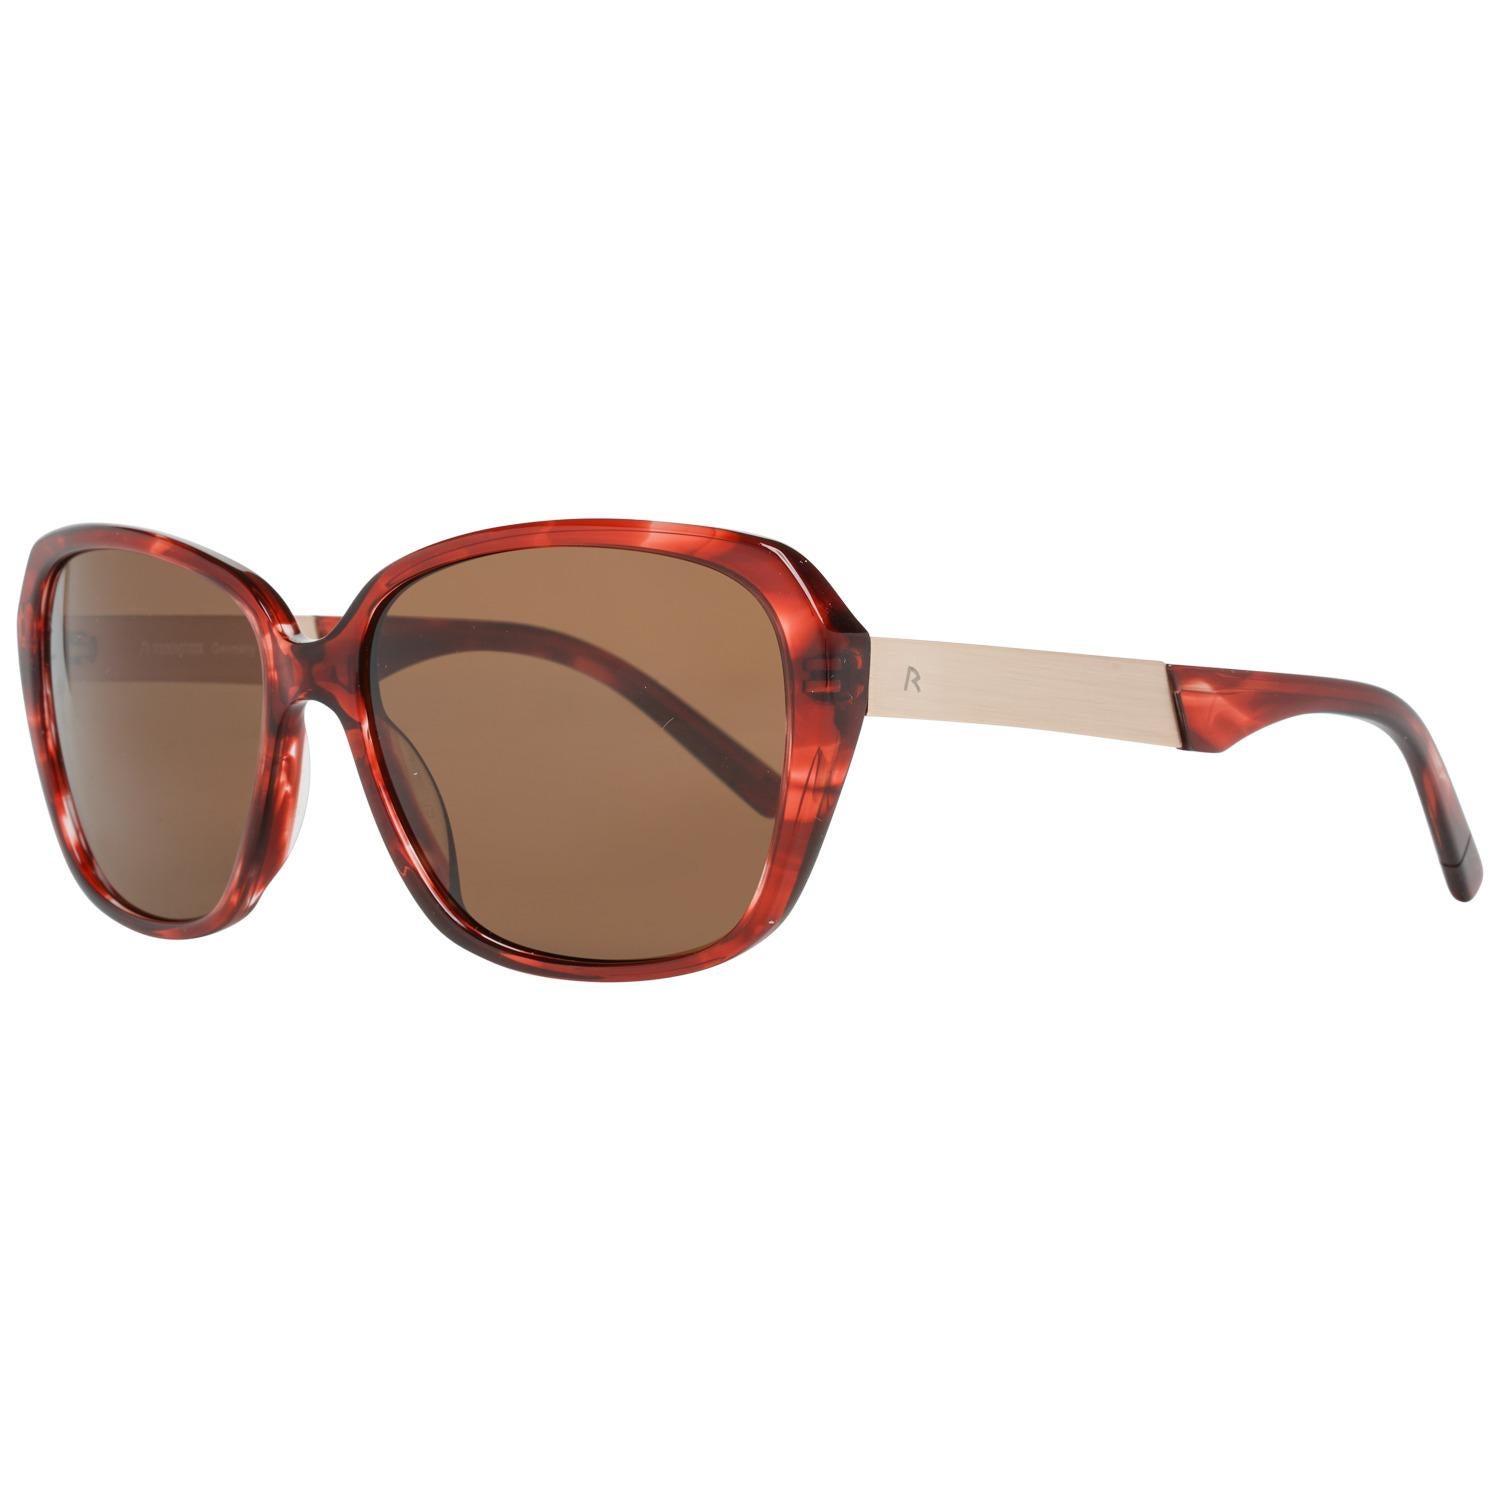 Details
MATERIAL: Metal
COLOR: Red
MODEL: R3299 B 57
GENDER: Women
COUNTRY OF MANUFACTURE: China
TYPE: Sunglasses
ORIGINAL CASE?: Yes
STYLE: Oval
OCCASION: Casual
FEATURES: Lightweight
LENS COLOR: Brown
LENS TECHNOLOGY: No Extra
YEAR MANUFACTURED: